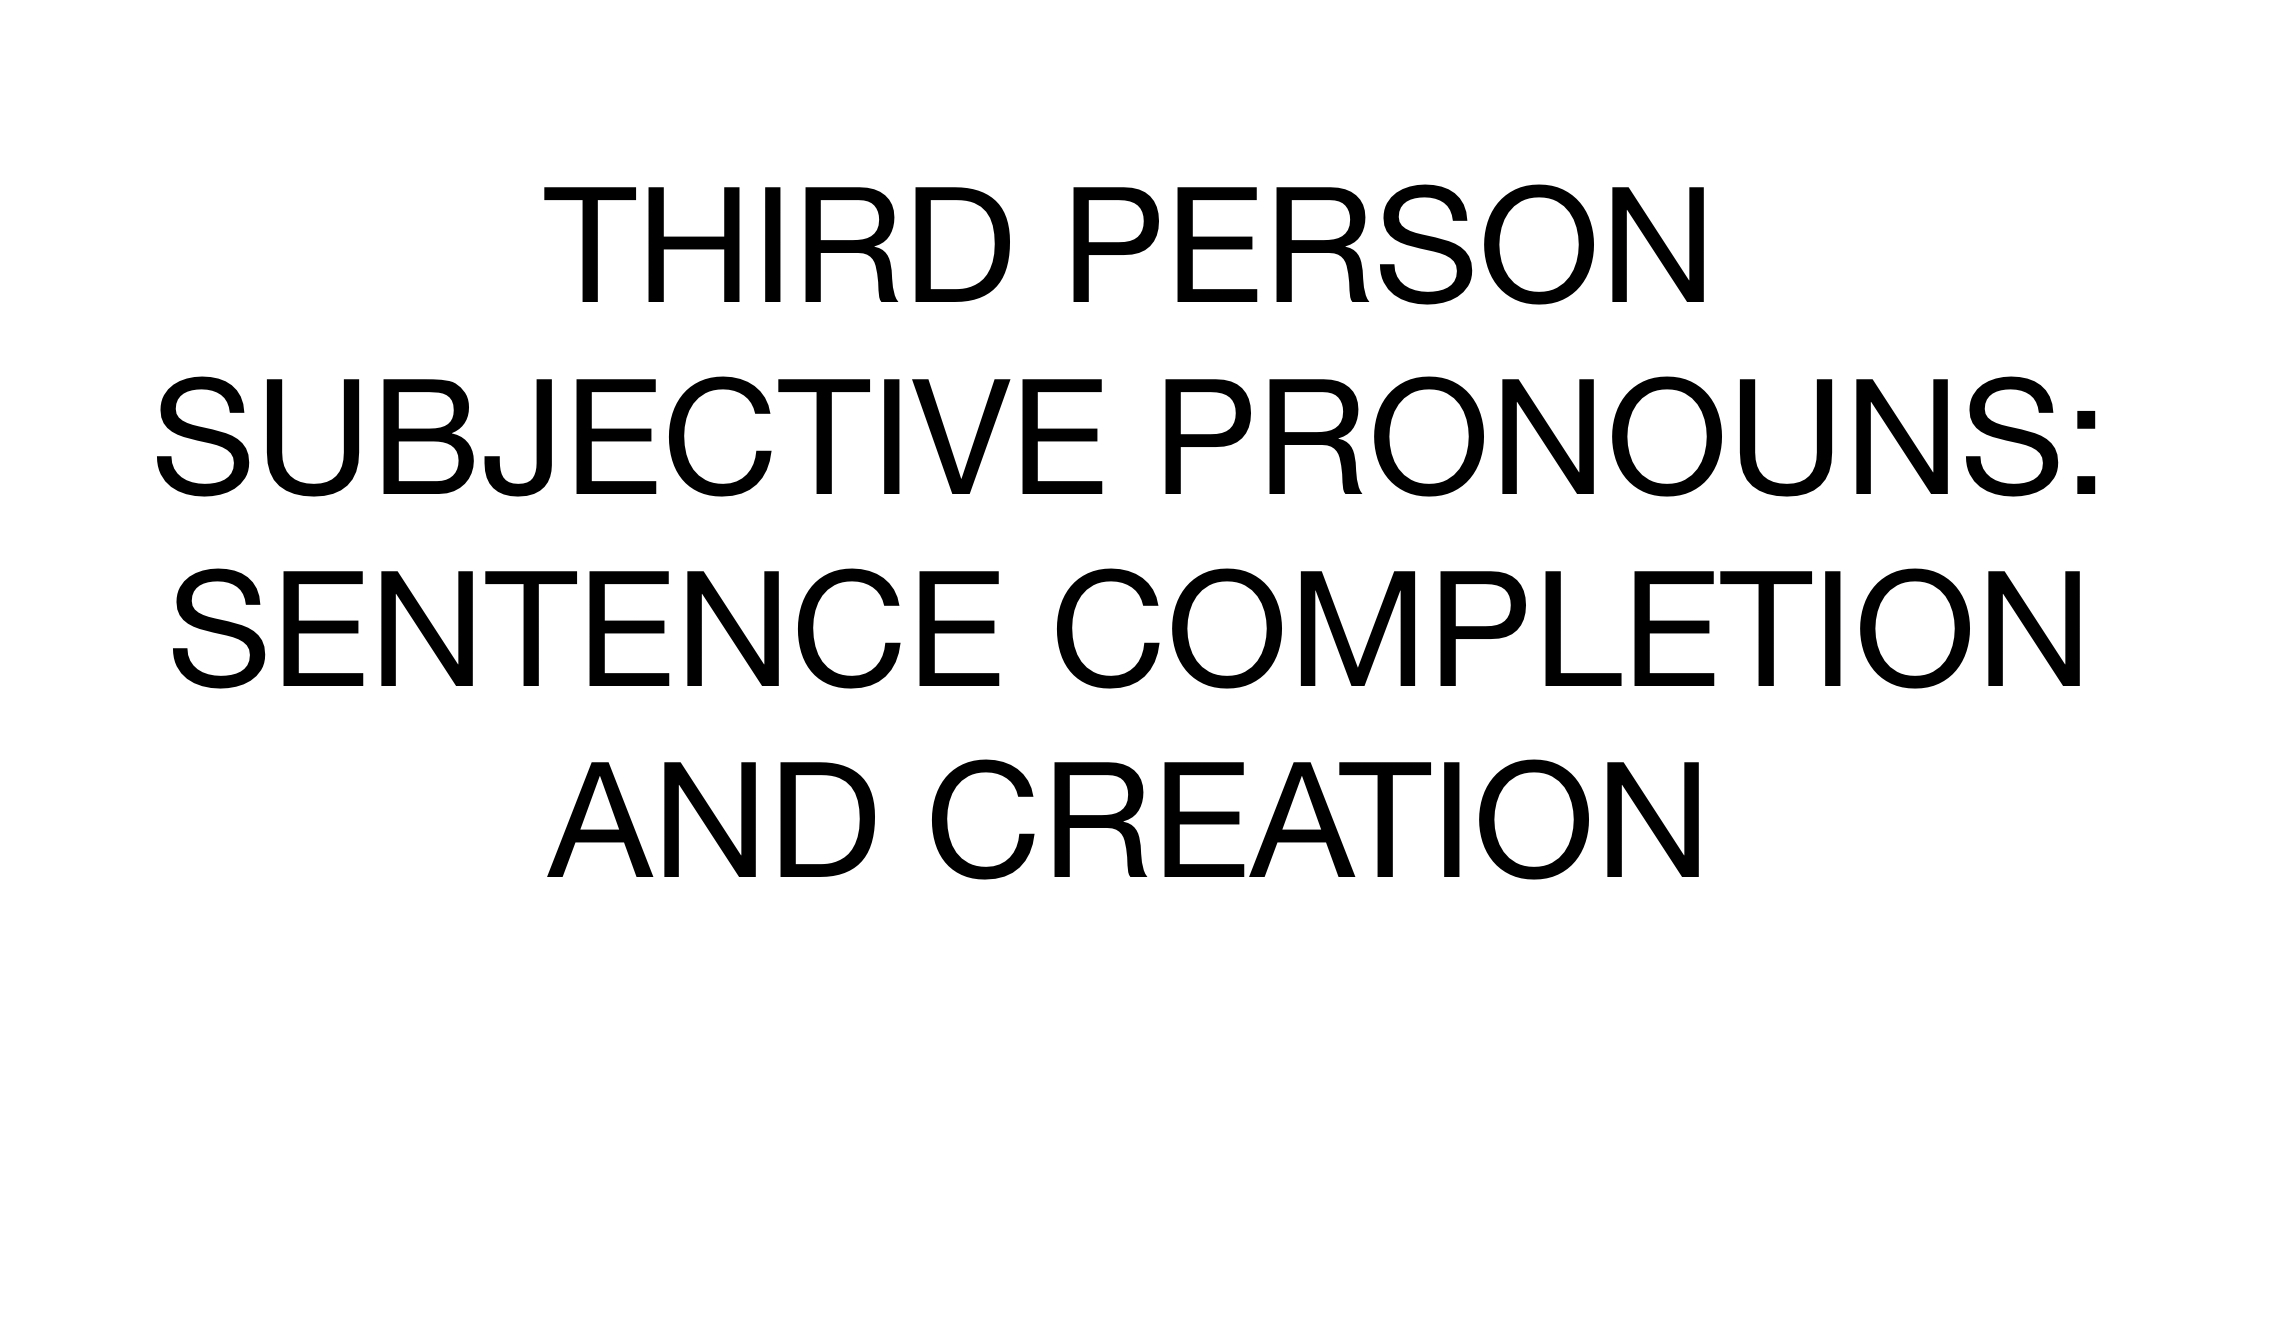 Third Person Subjective Pronouns: Sentence Completion and Creation image